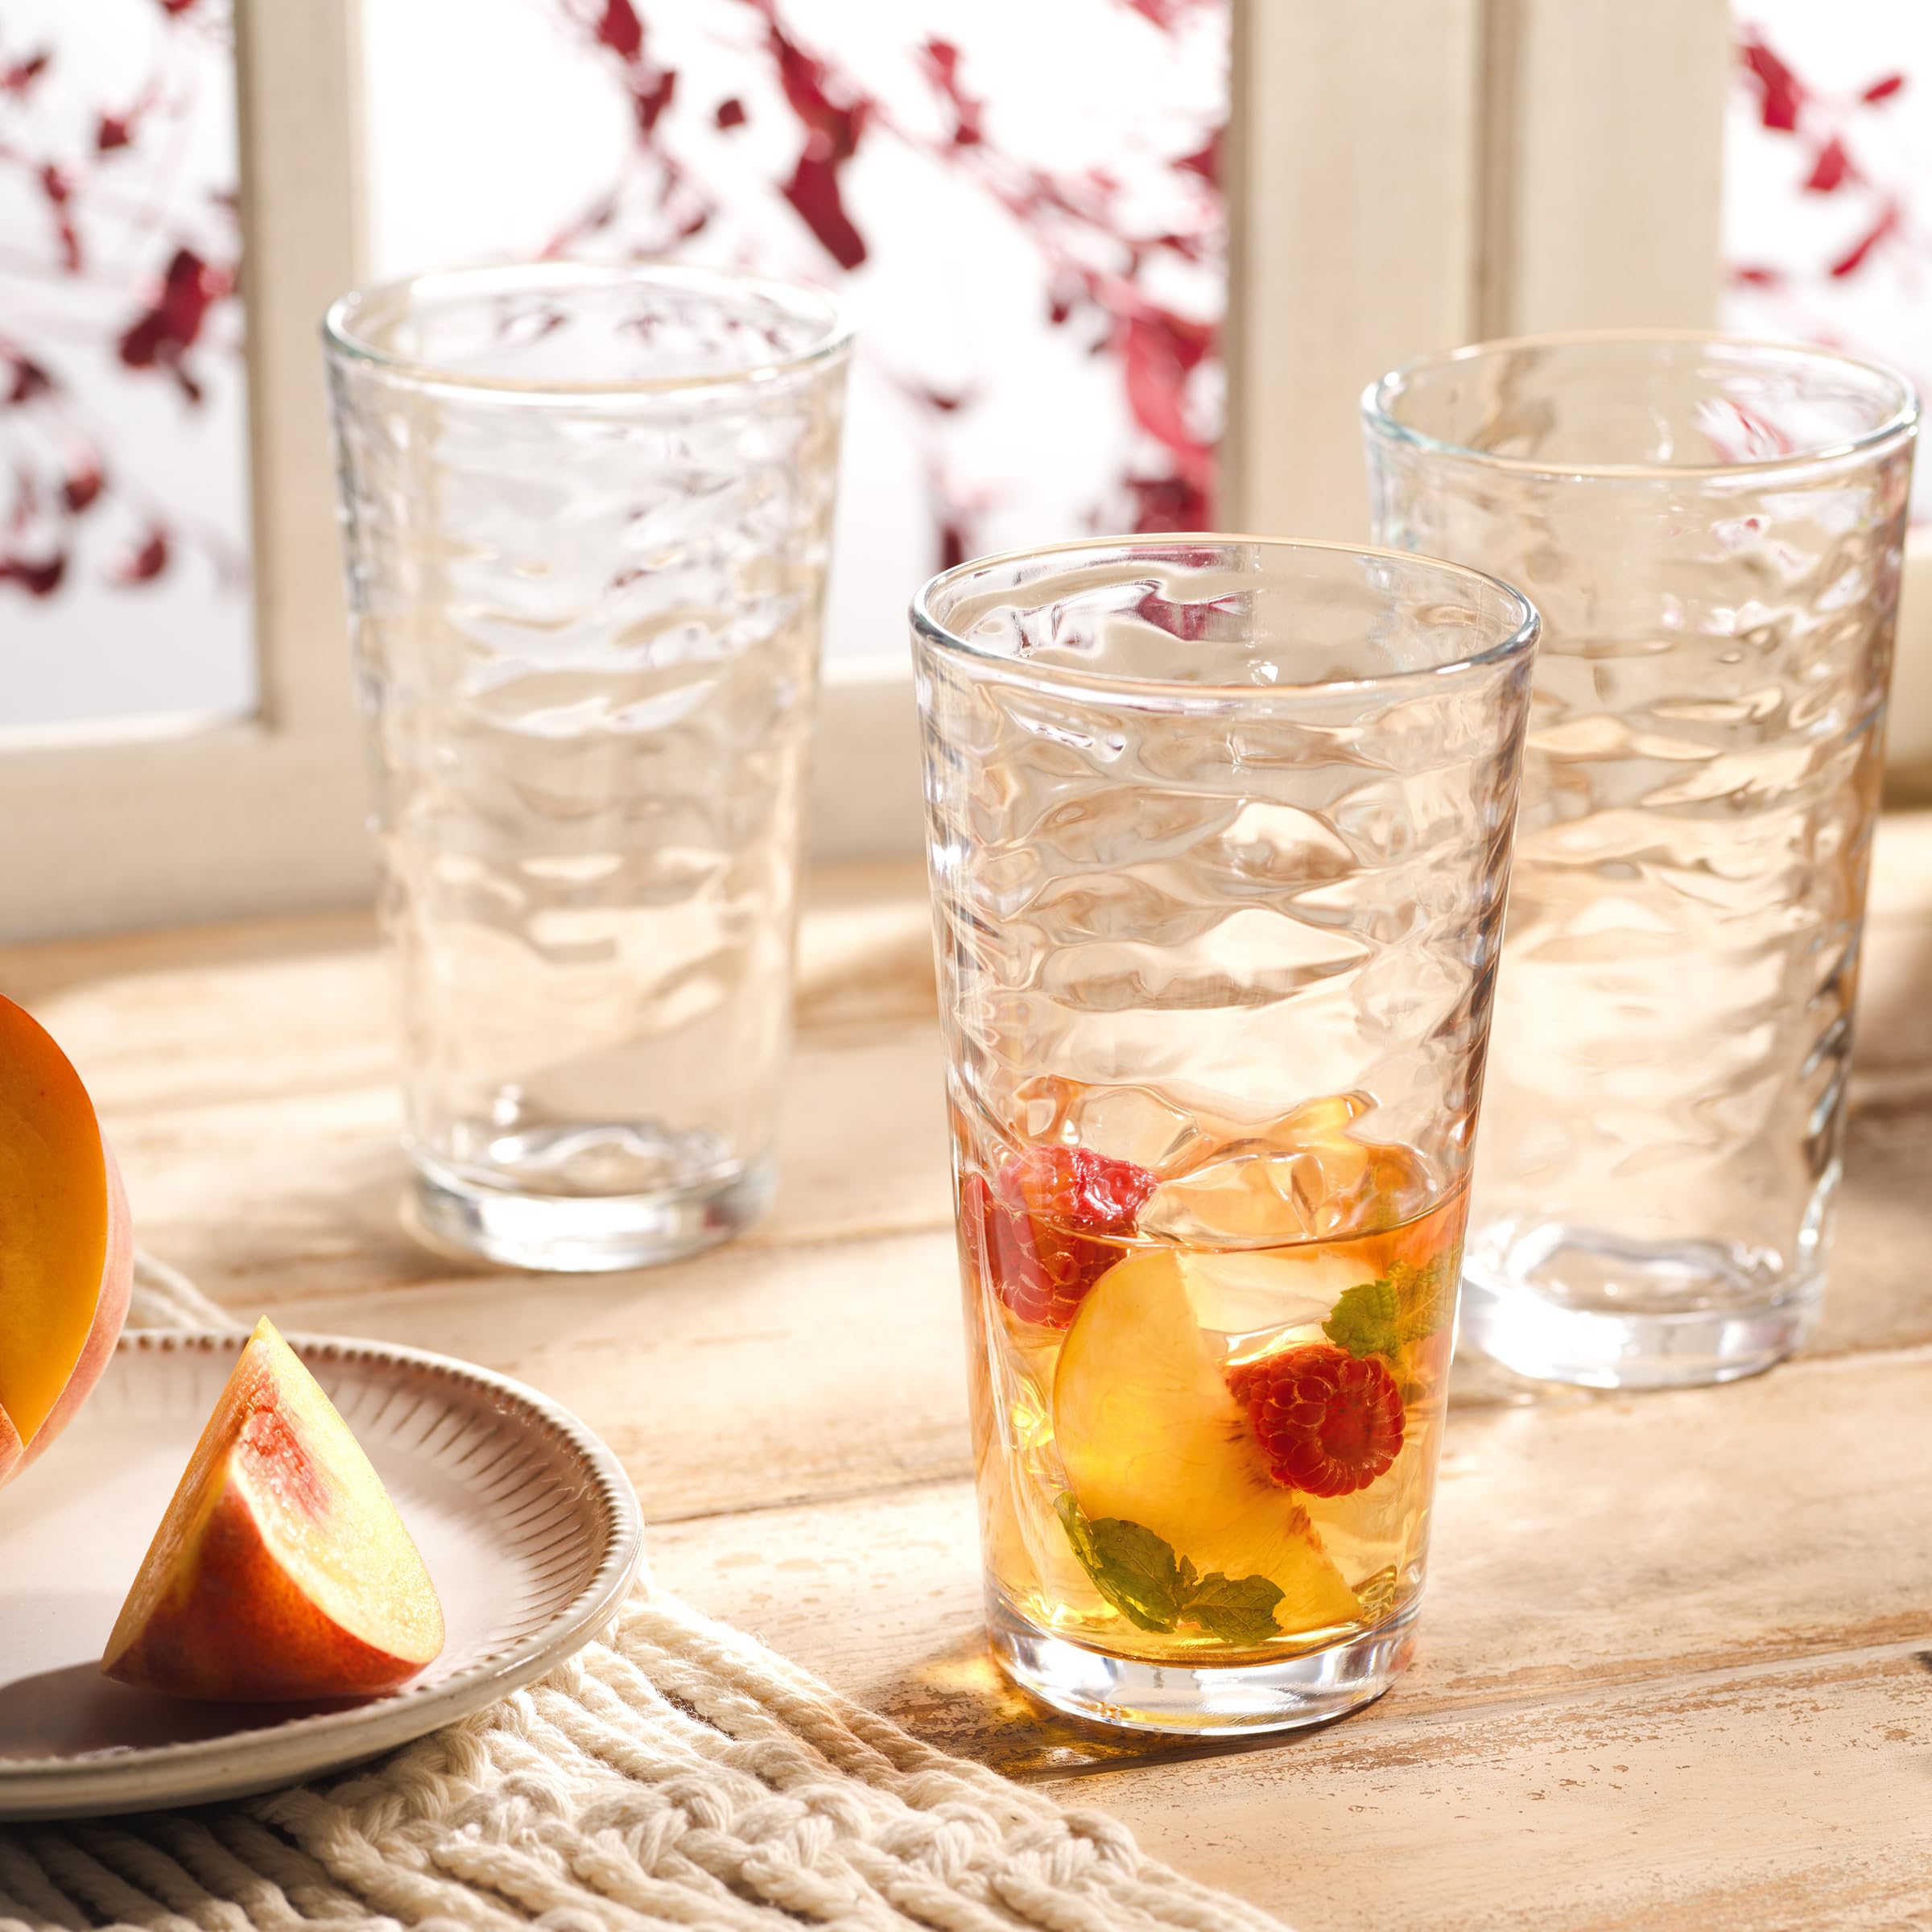 Glaver's Drinking Glasses Set of 4 Highball Glass Cups, 17 Oz. Basic Cooler Glassware, ideal for Water, Juice, Cocktails, Iced Tea and more. Dishwasher Safe.